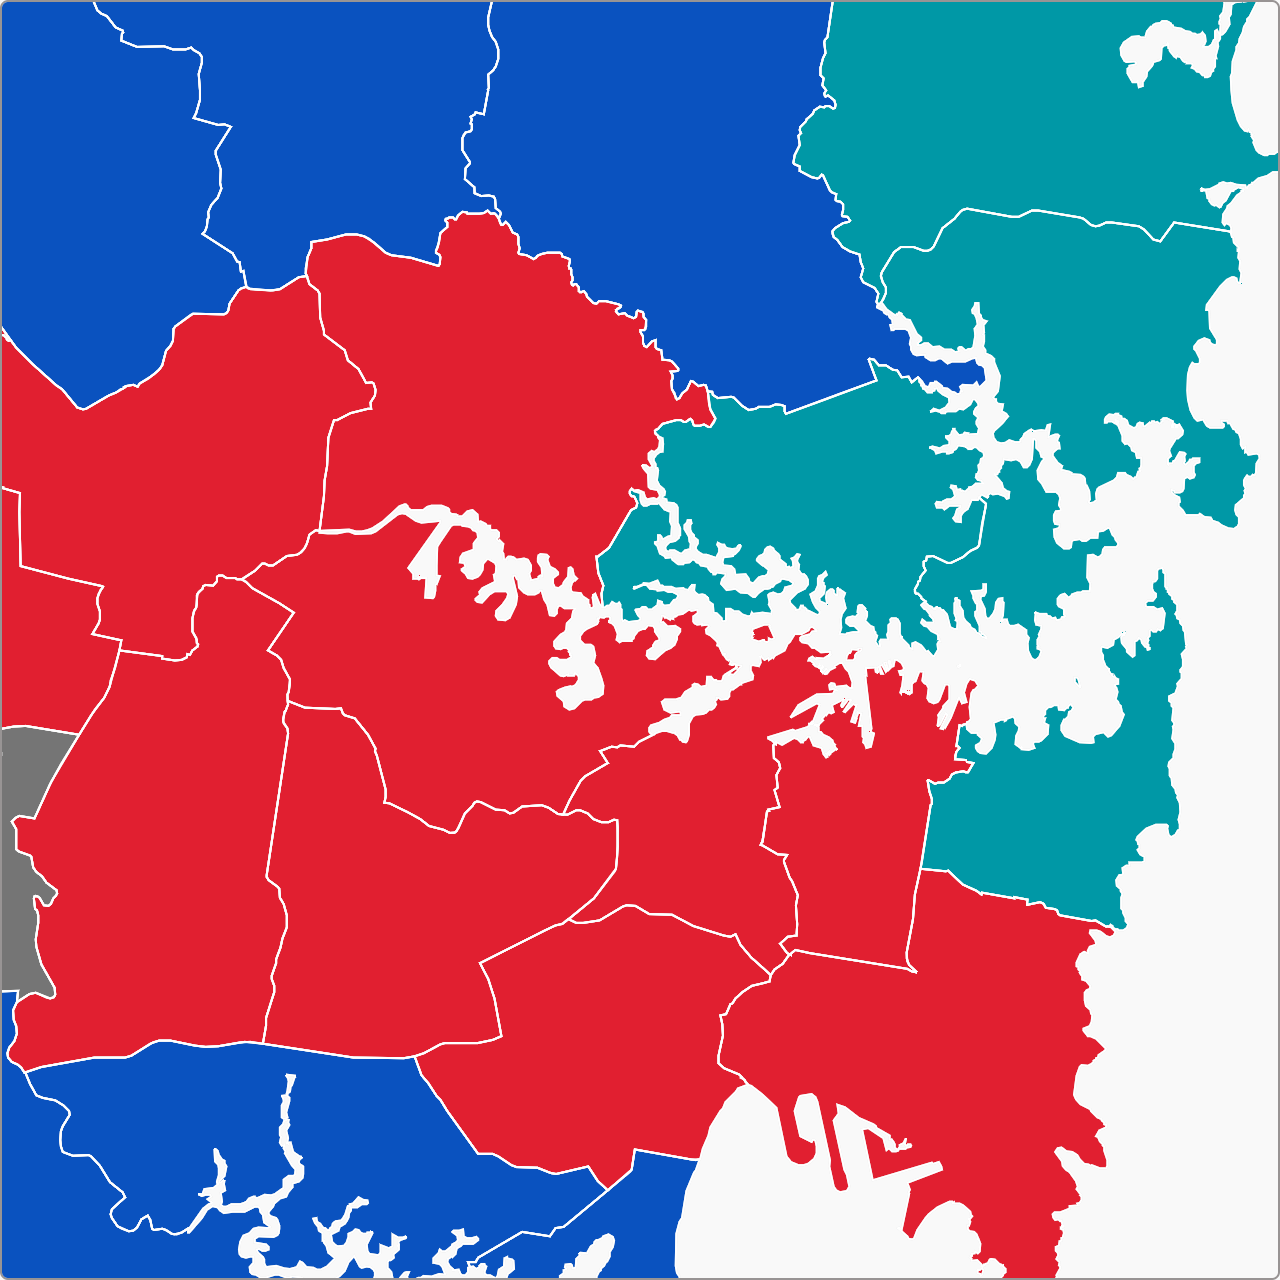 An electoral map of Sydney showing the 2022 election results.